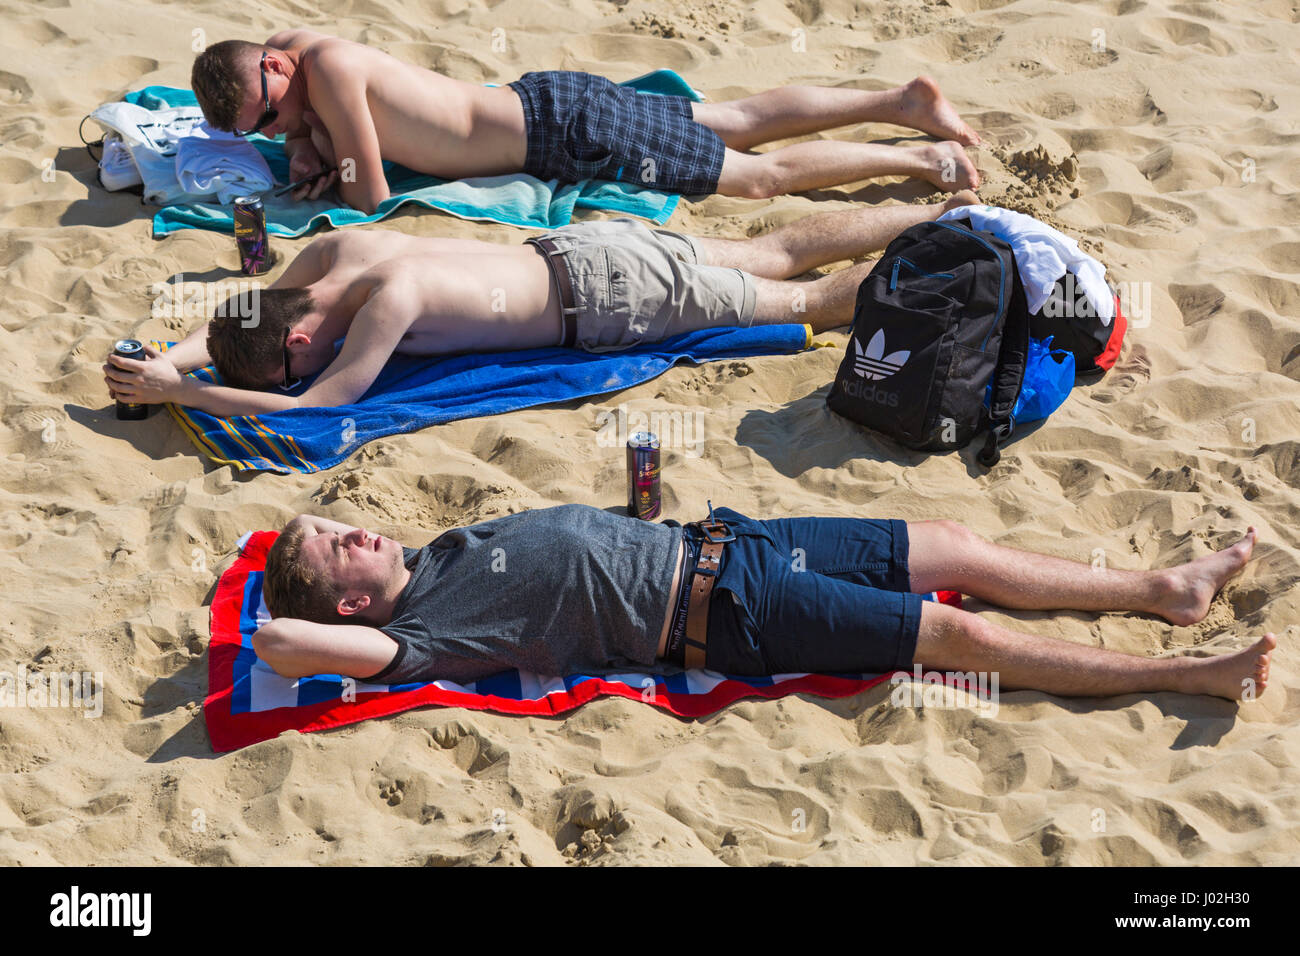 Bournemouth, Dorset, UK. 9th Apr, 2017. UK weather: lovely warm sunny day as visitors head to the seaside to make the most of the sunshine at Bournemouth beaches. Mid day and the beaches are very busy! Three young men sunbathing on the beach Credit: Carolyn Jenkins/Alamy Live News Stock Photo